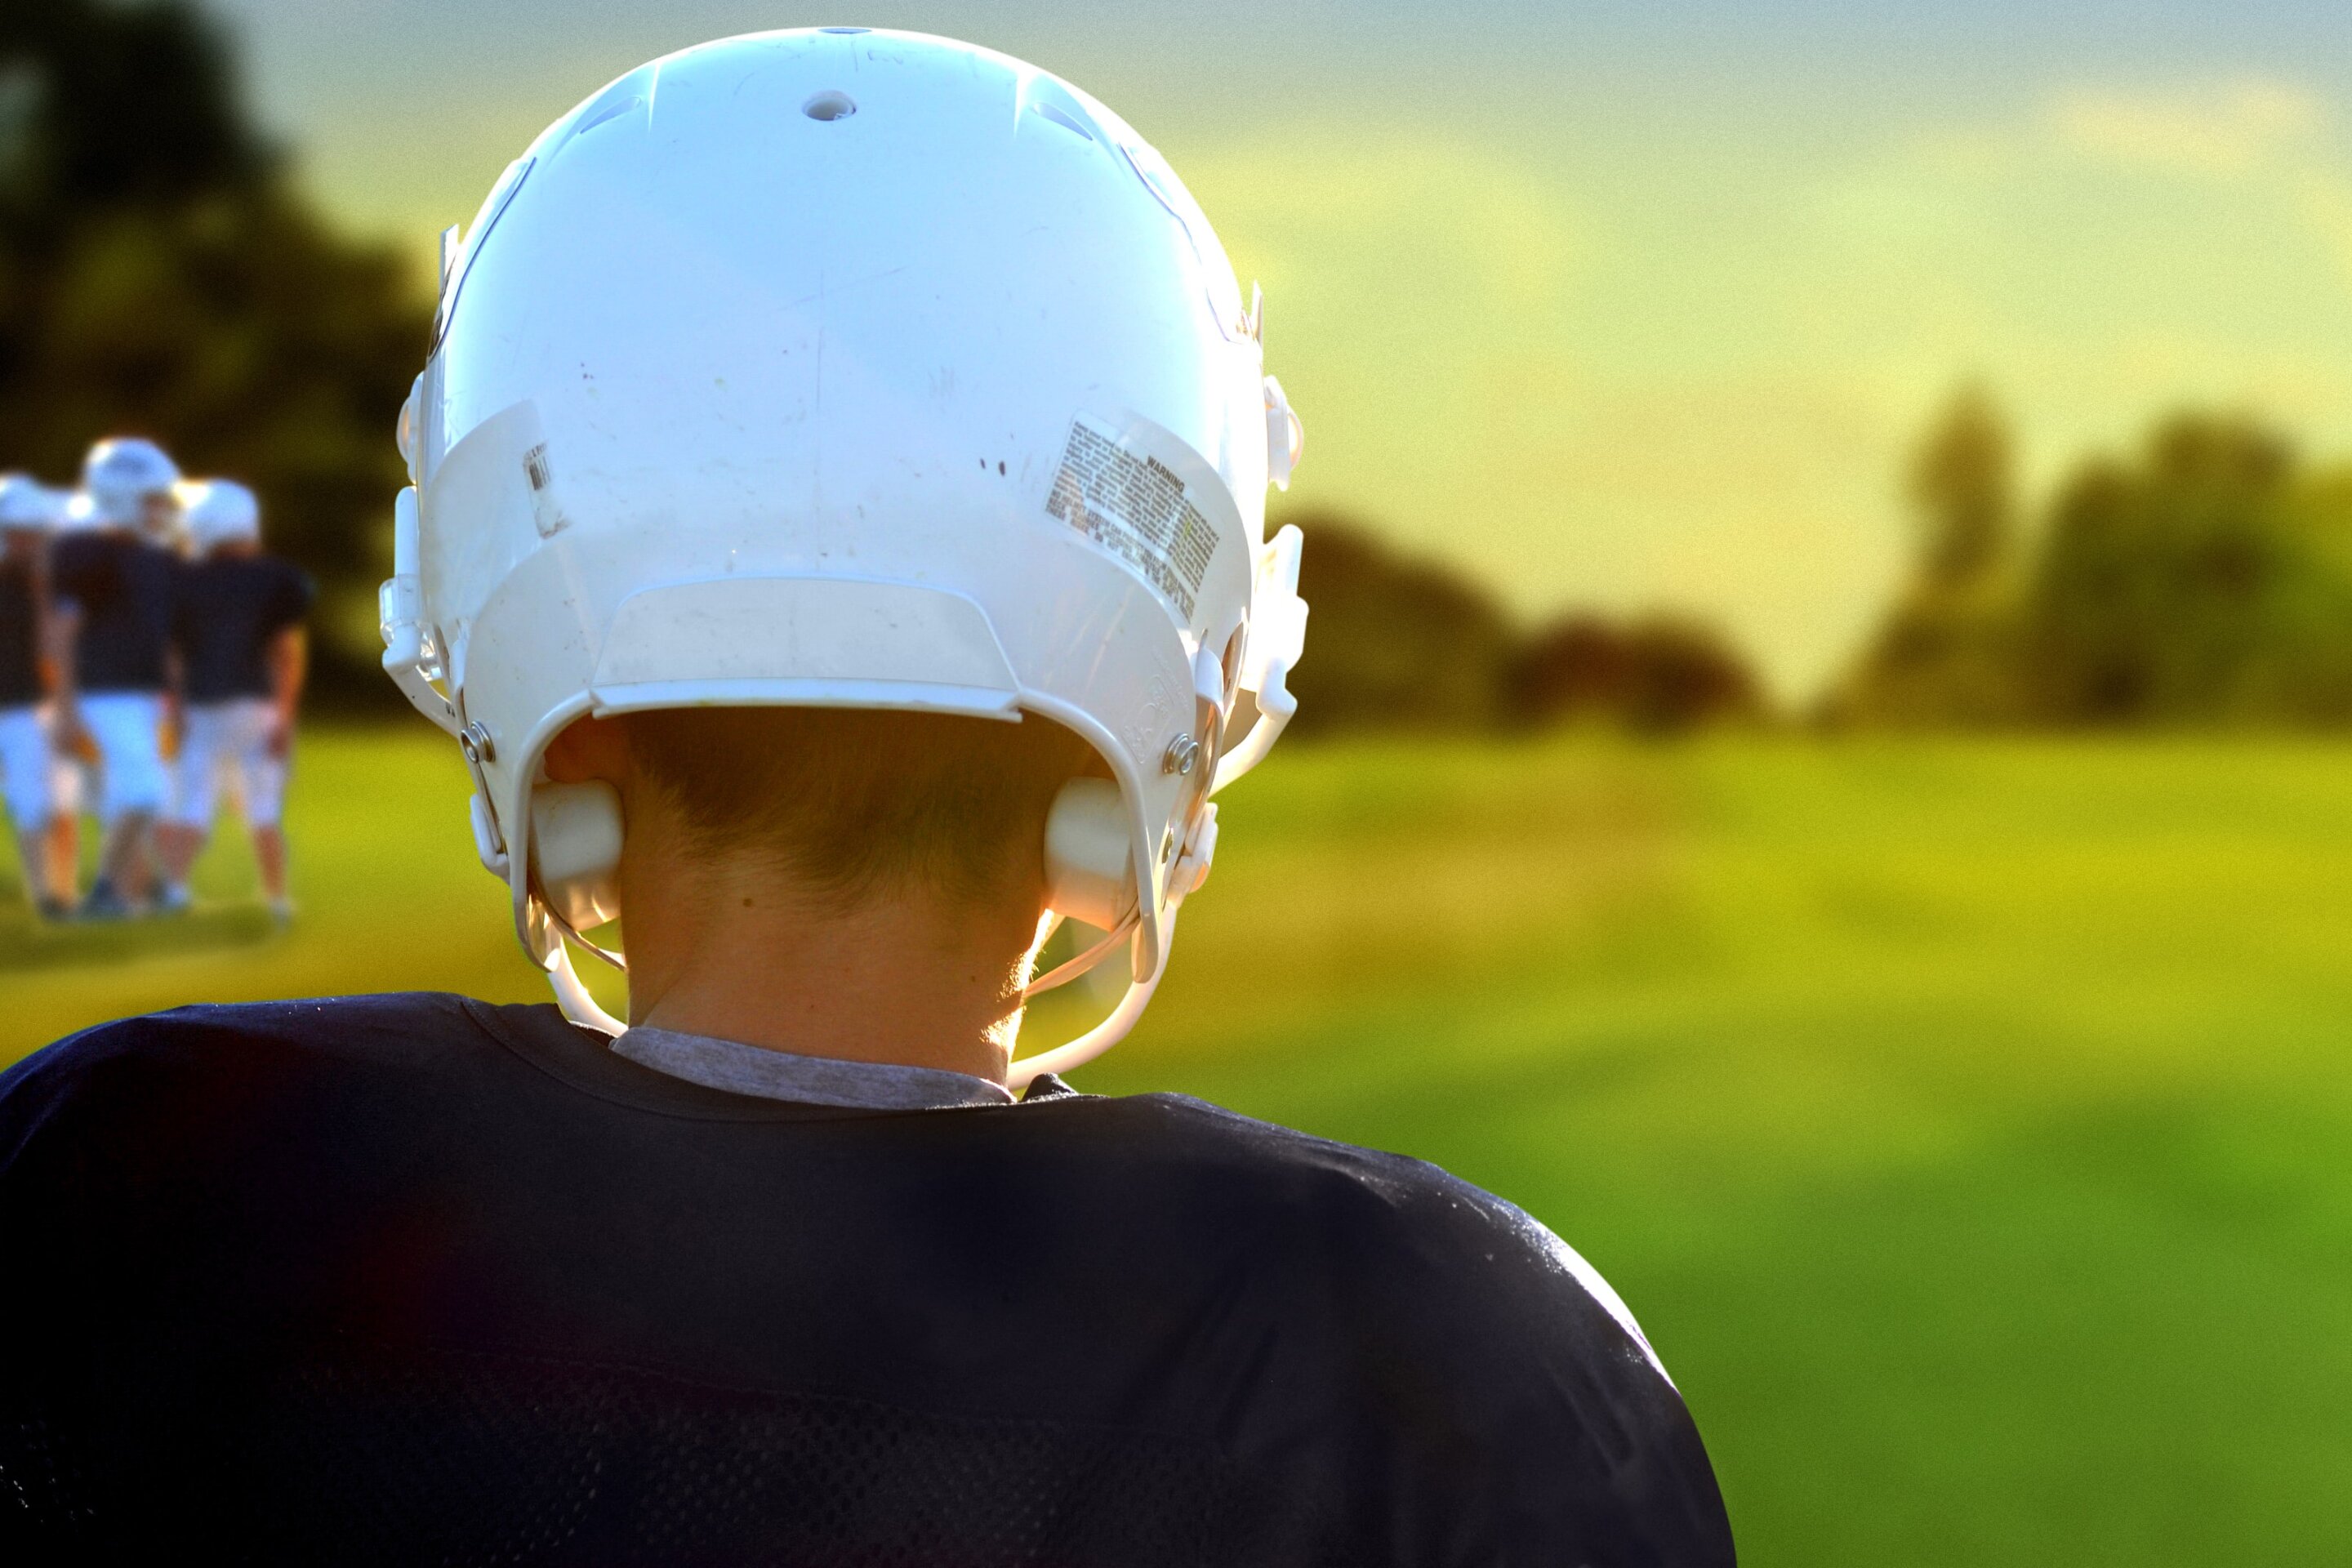 #Three or more concussions linked with worse brain function in later life